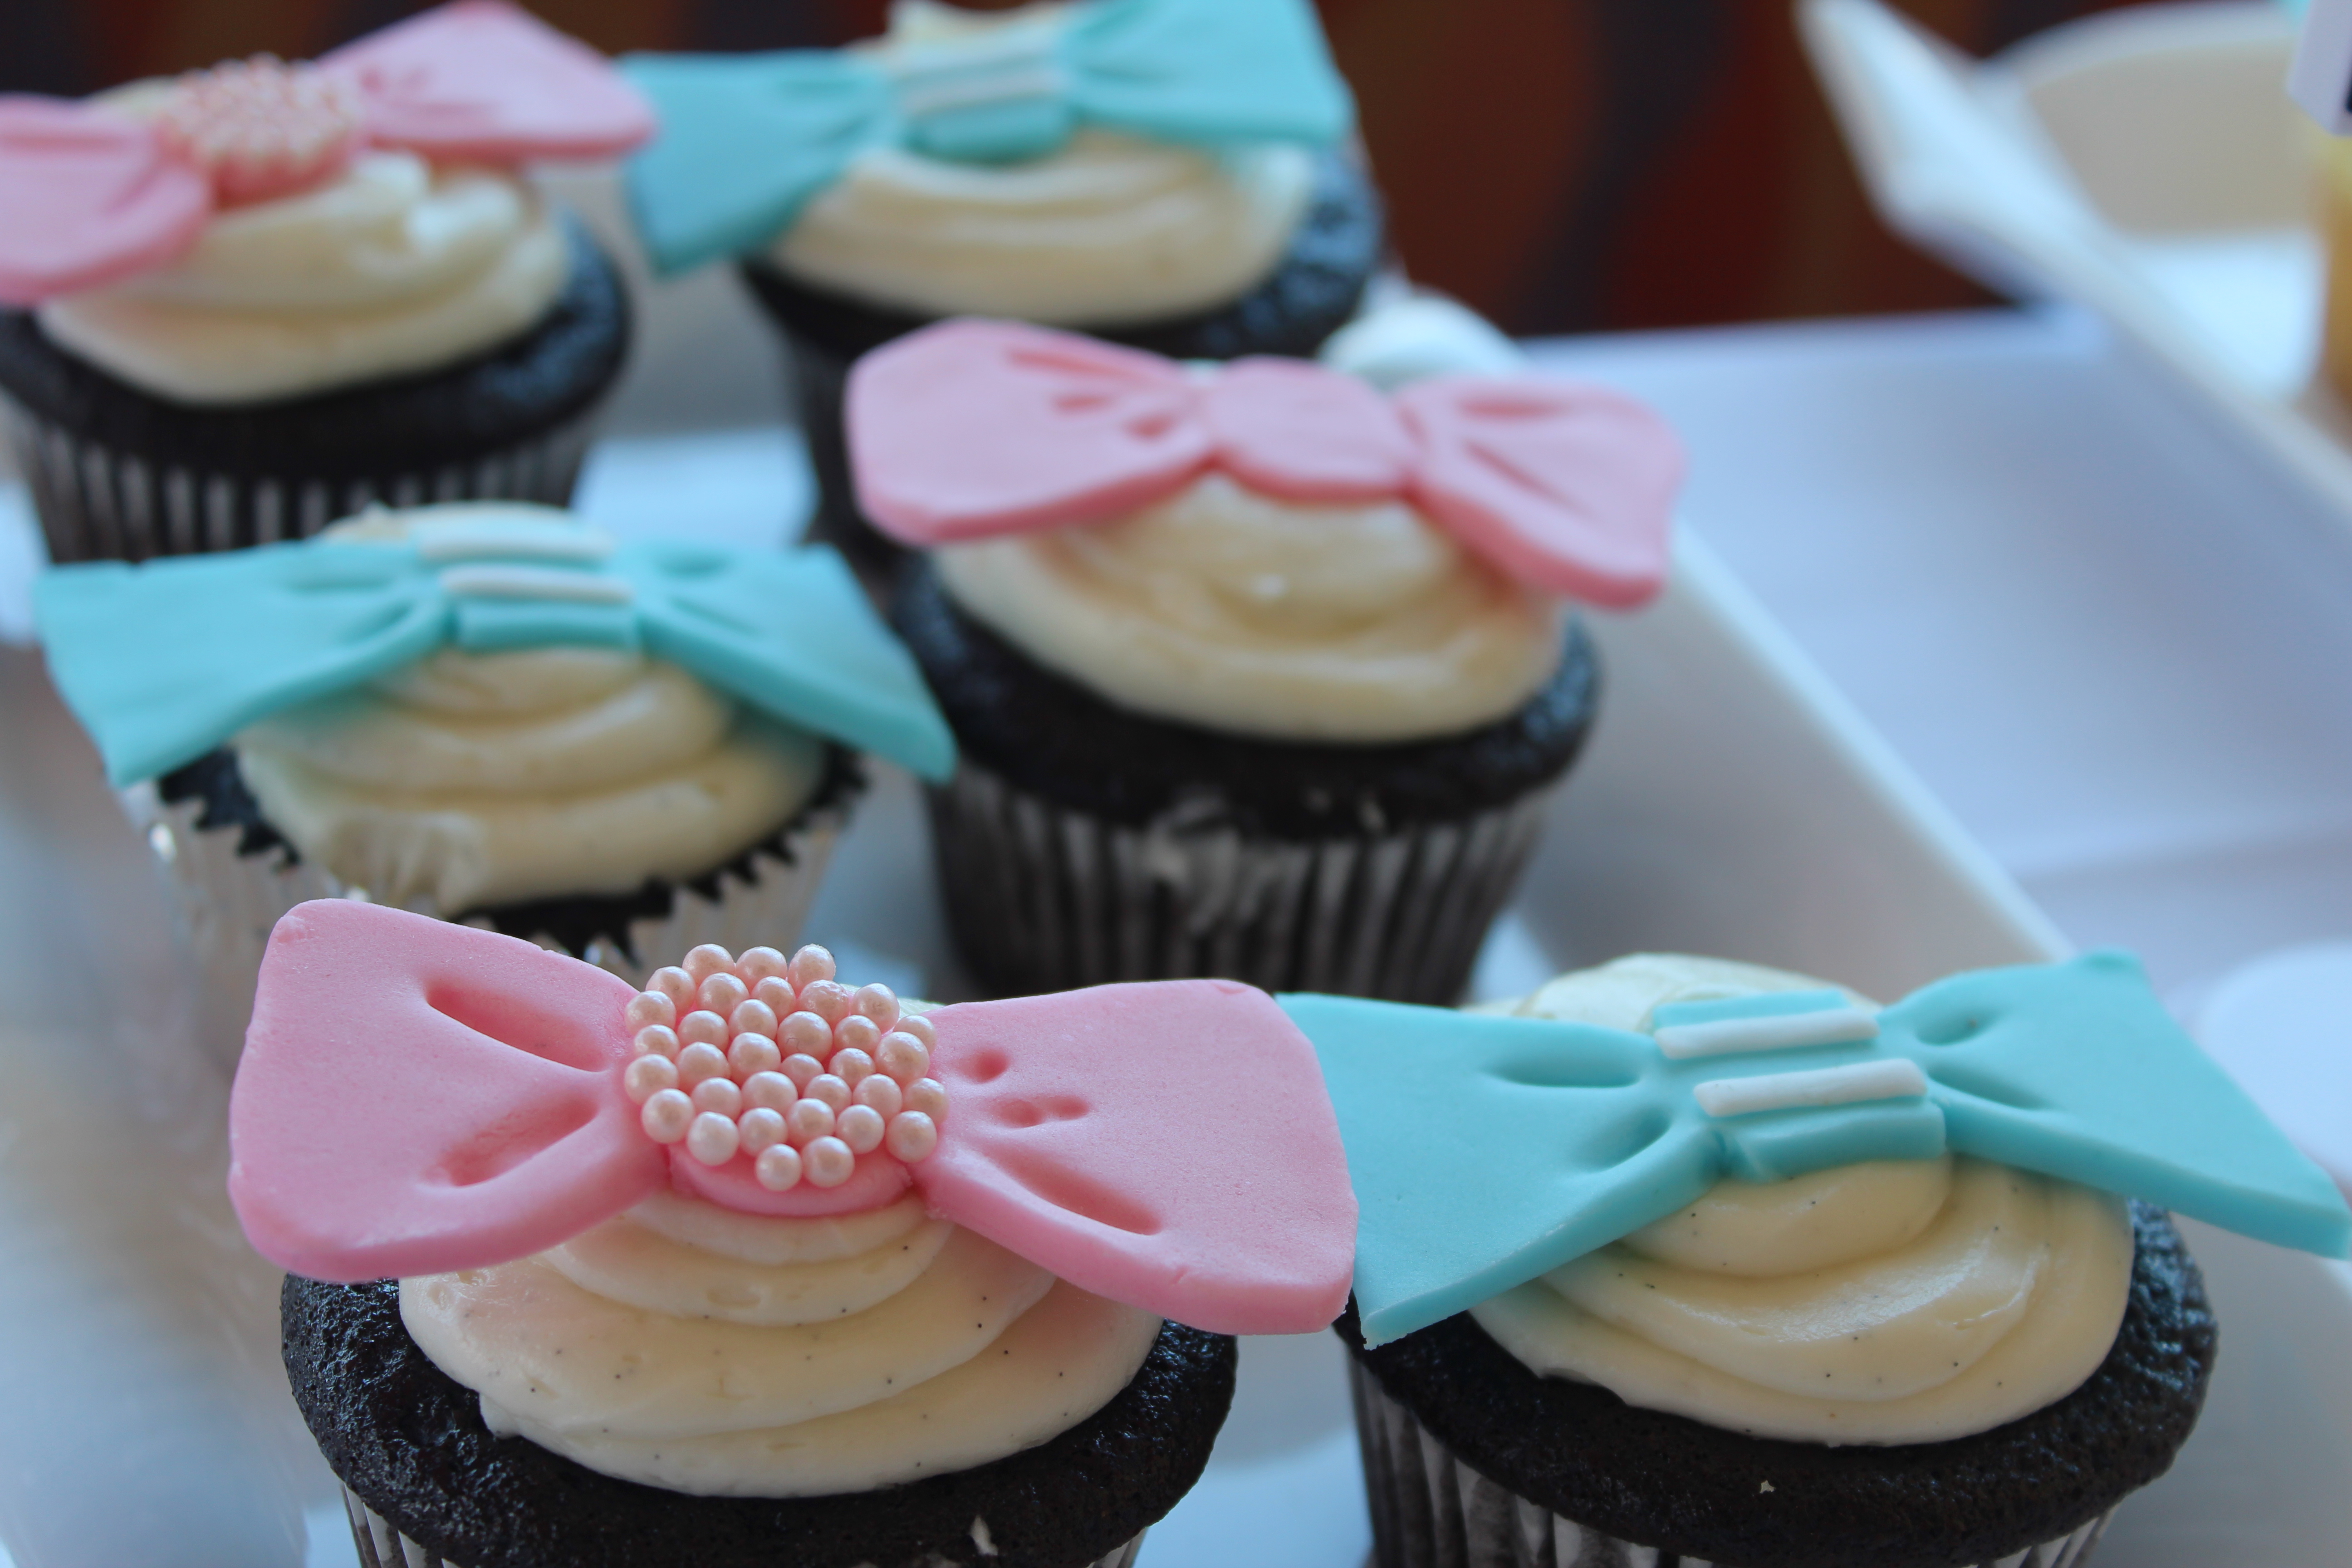 My baker Adah made the most incredible cupcakes! She even made the cute bows and bow ties from scratch!